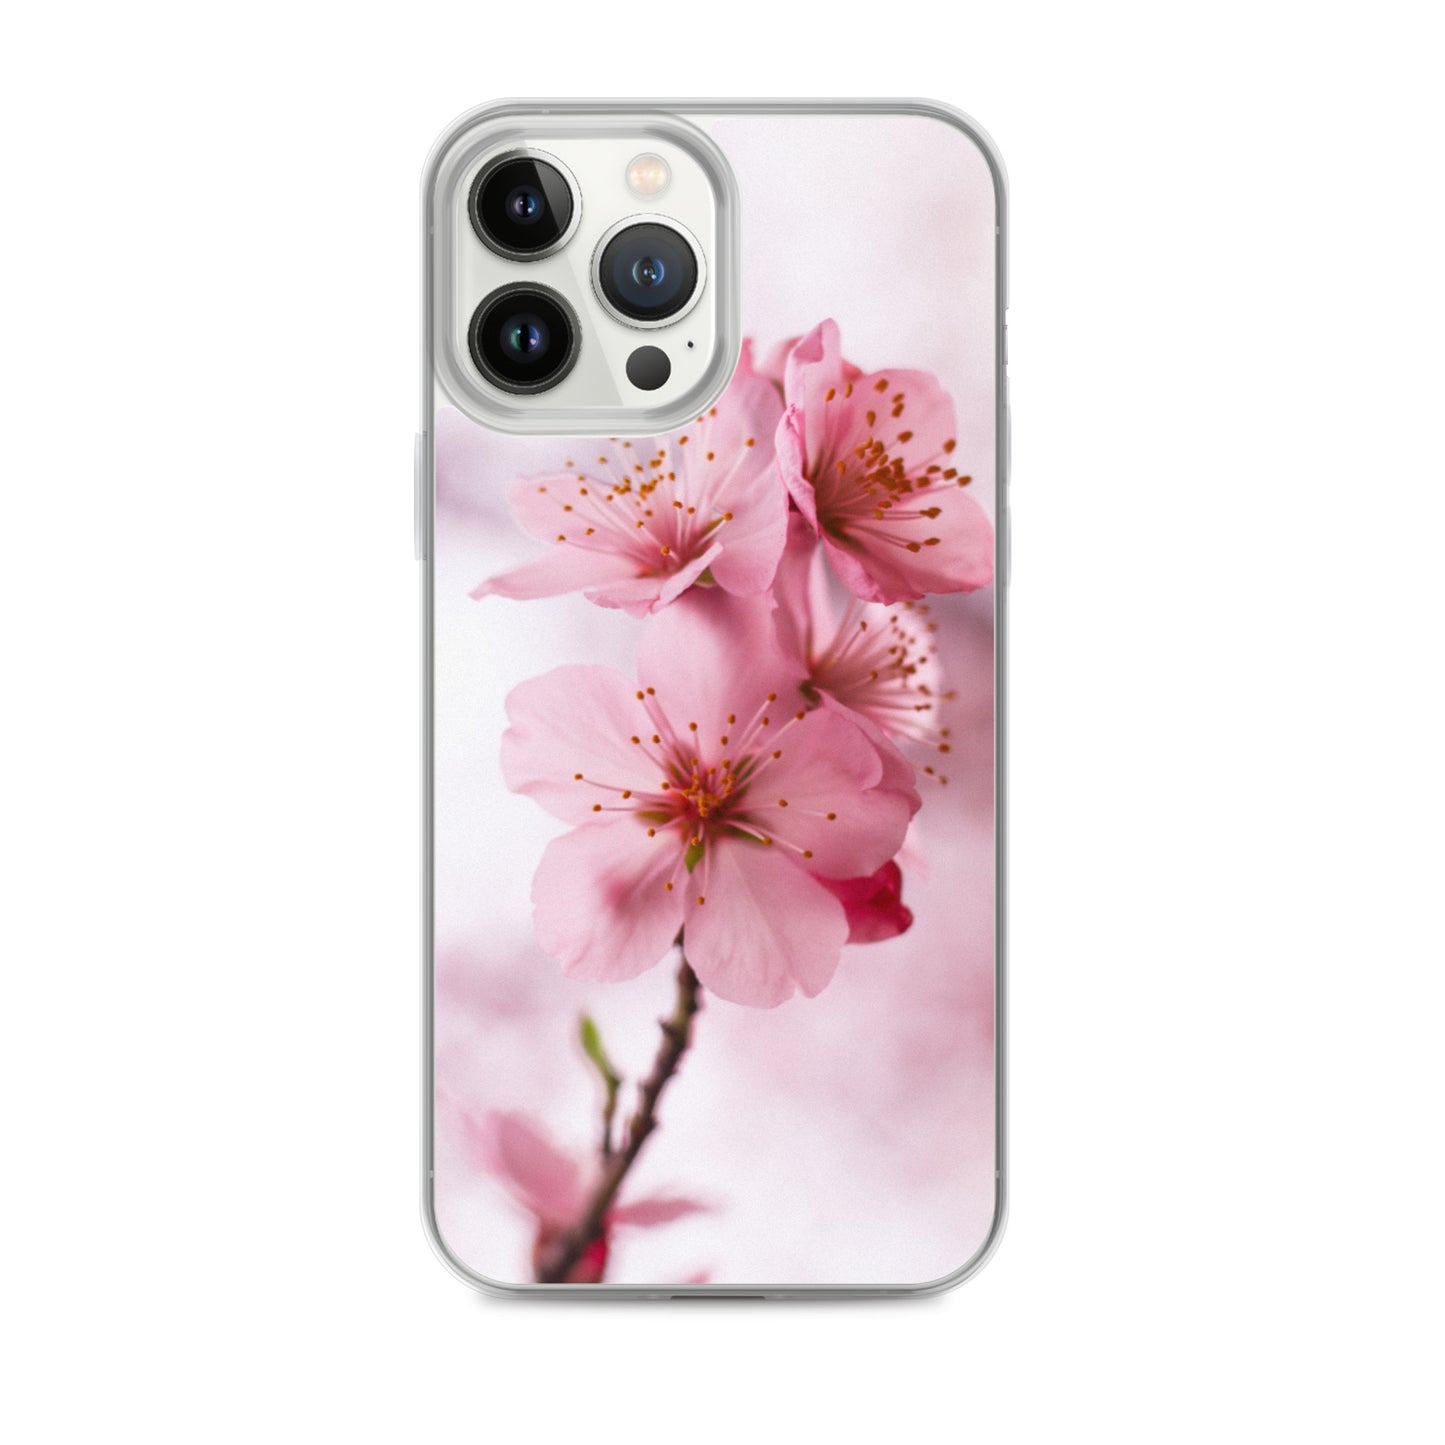 Cherry Blossom Phone Case, Pink Floral iPhone 13 Pro Max Cute Aesthetic 12 11 Mini SE 2020 XS Max XR X 8 7 Plus Starcove Fashion